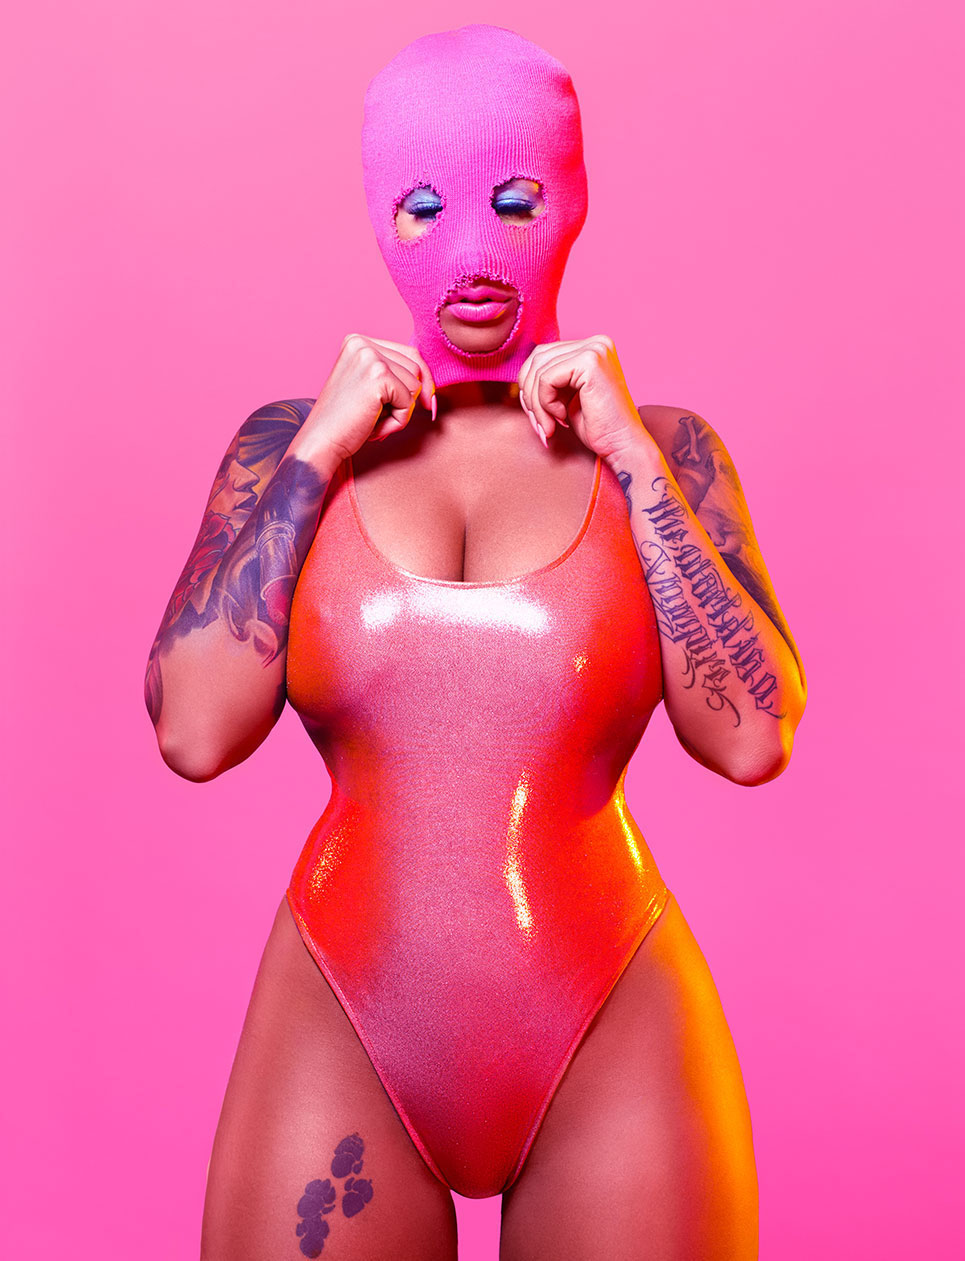 Amber rose shows pussy